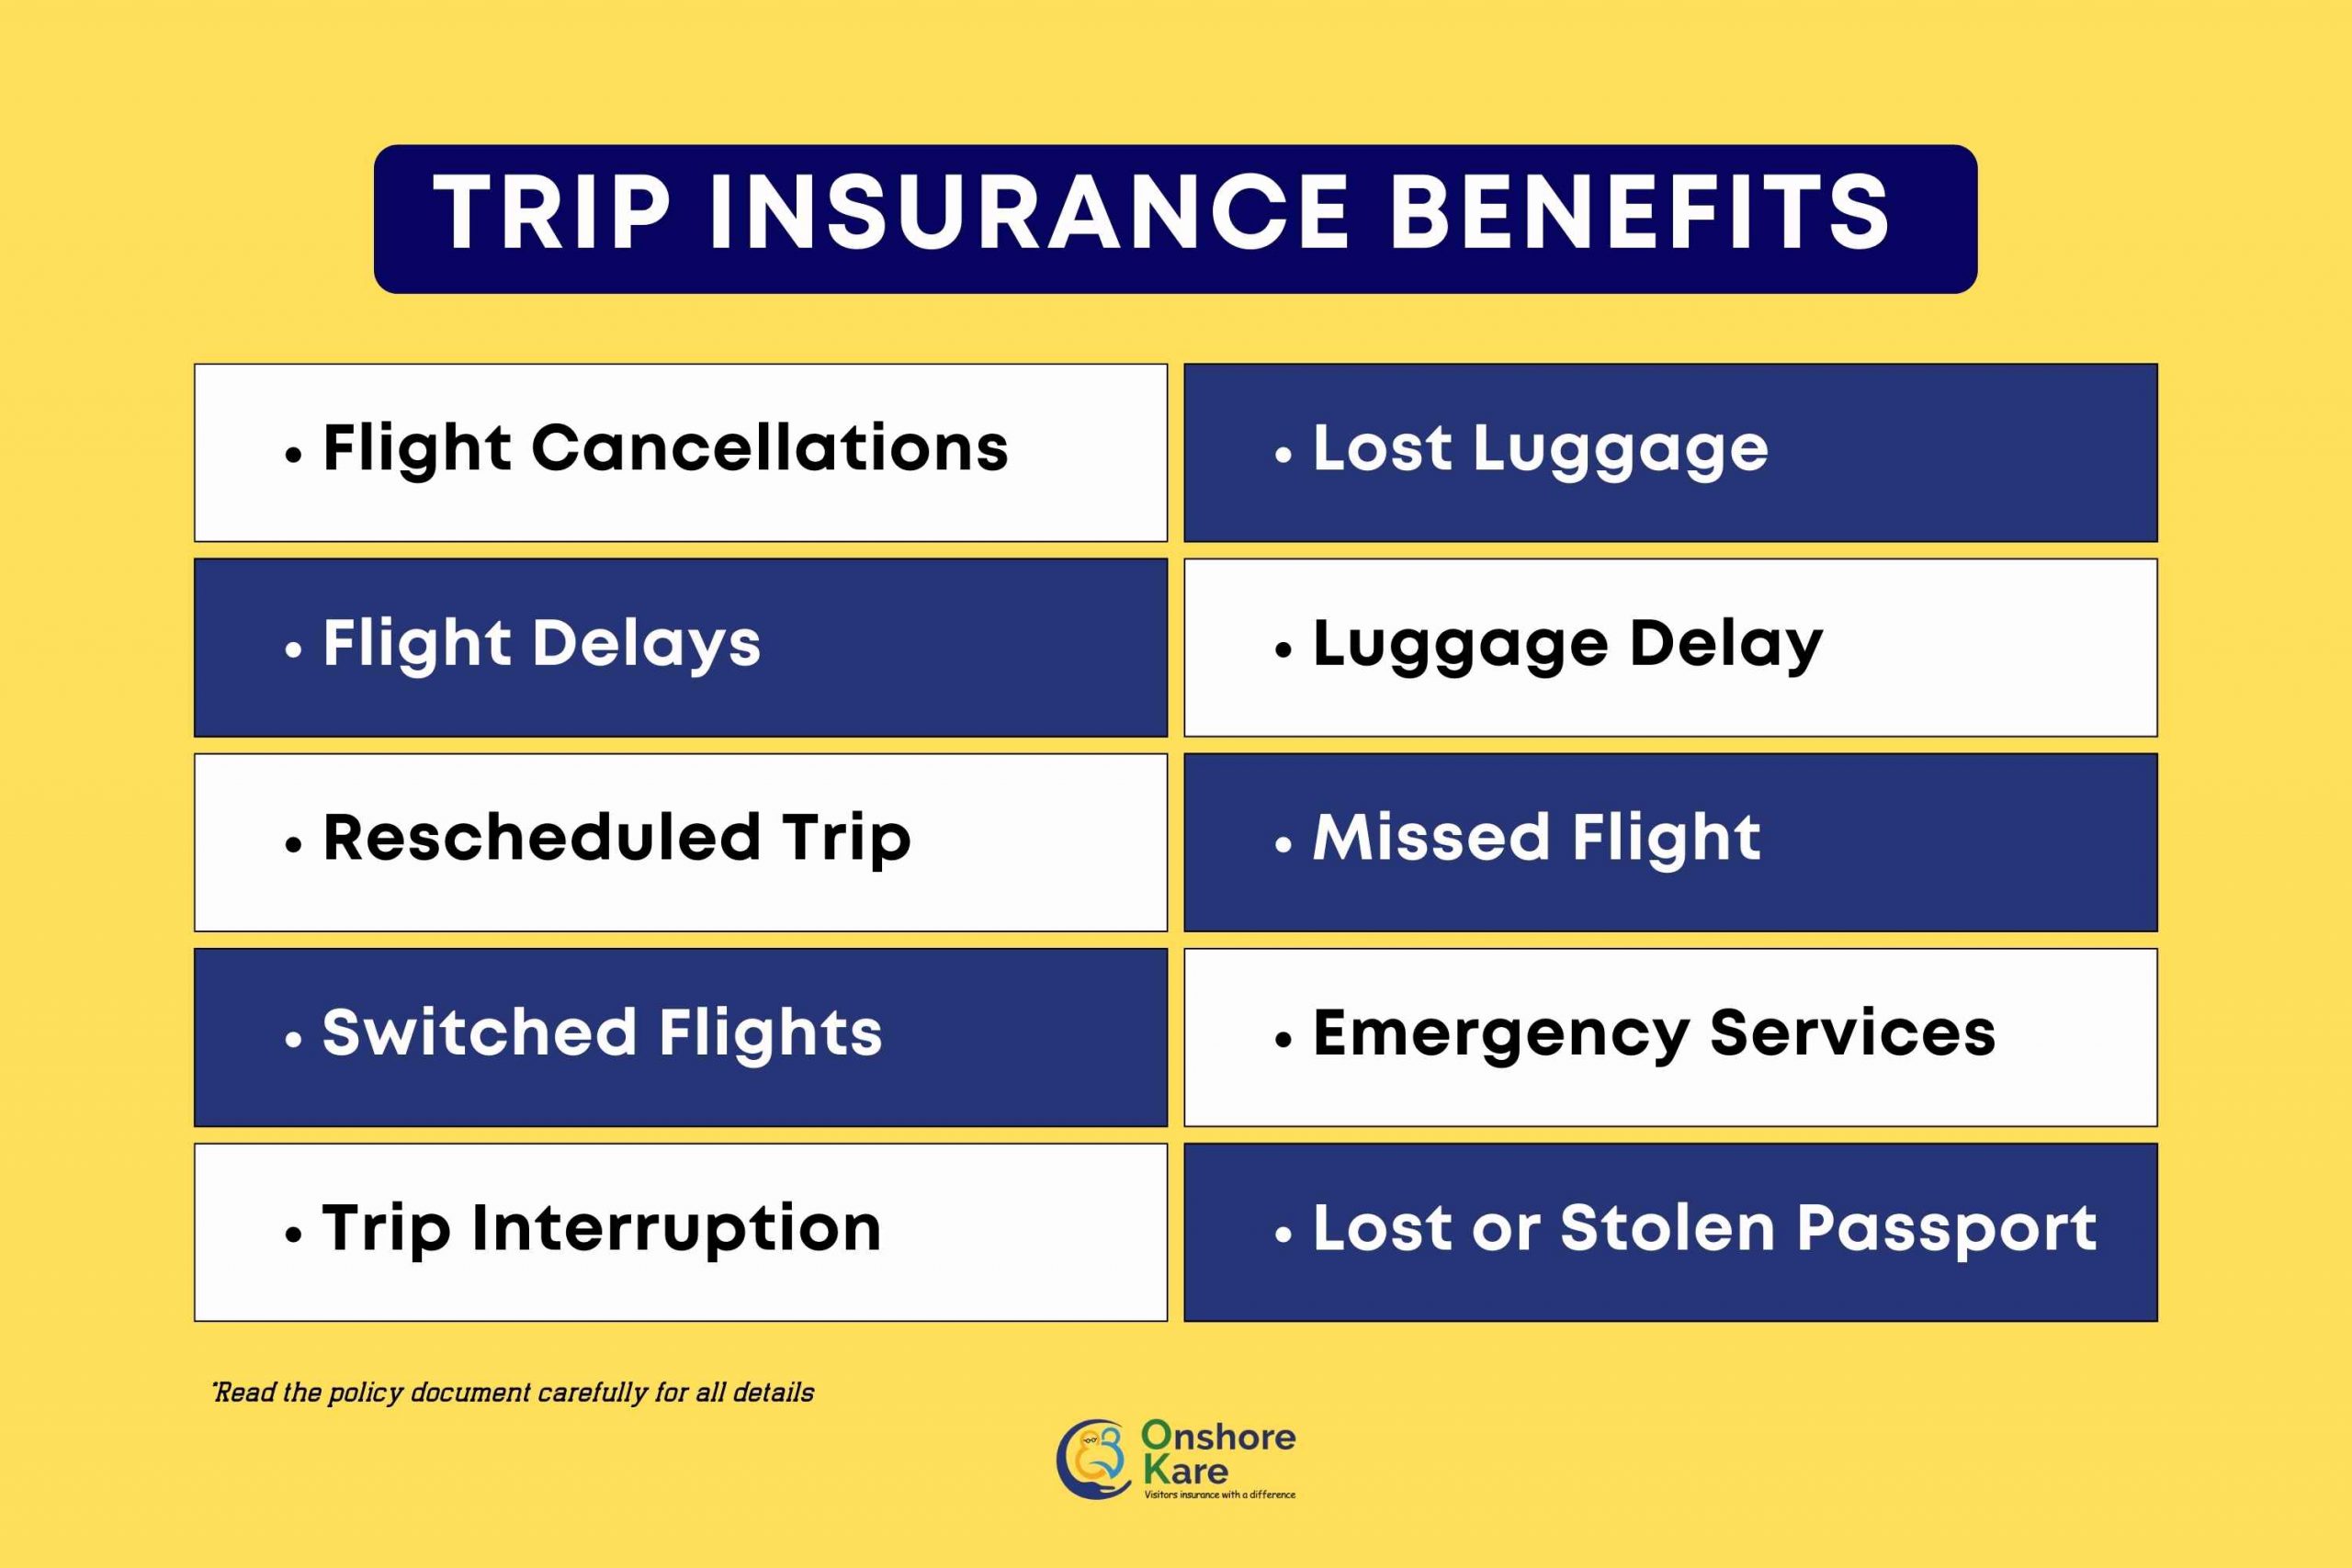 Flight Delays Are Common, Travel Insurance Is Your Best Friend